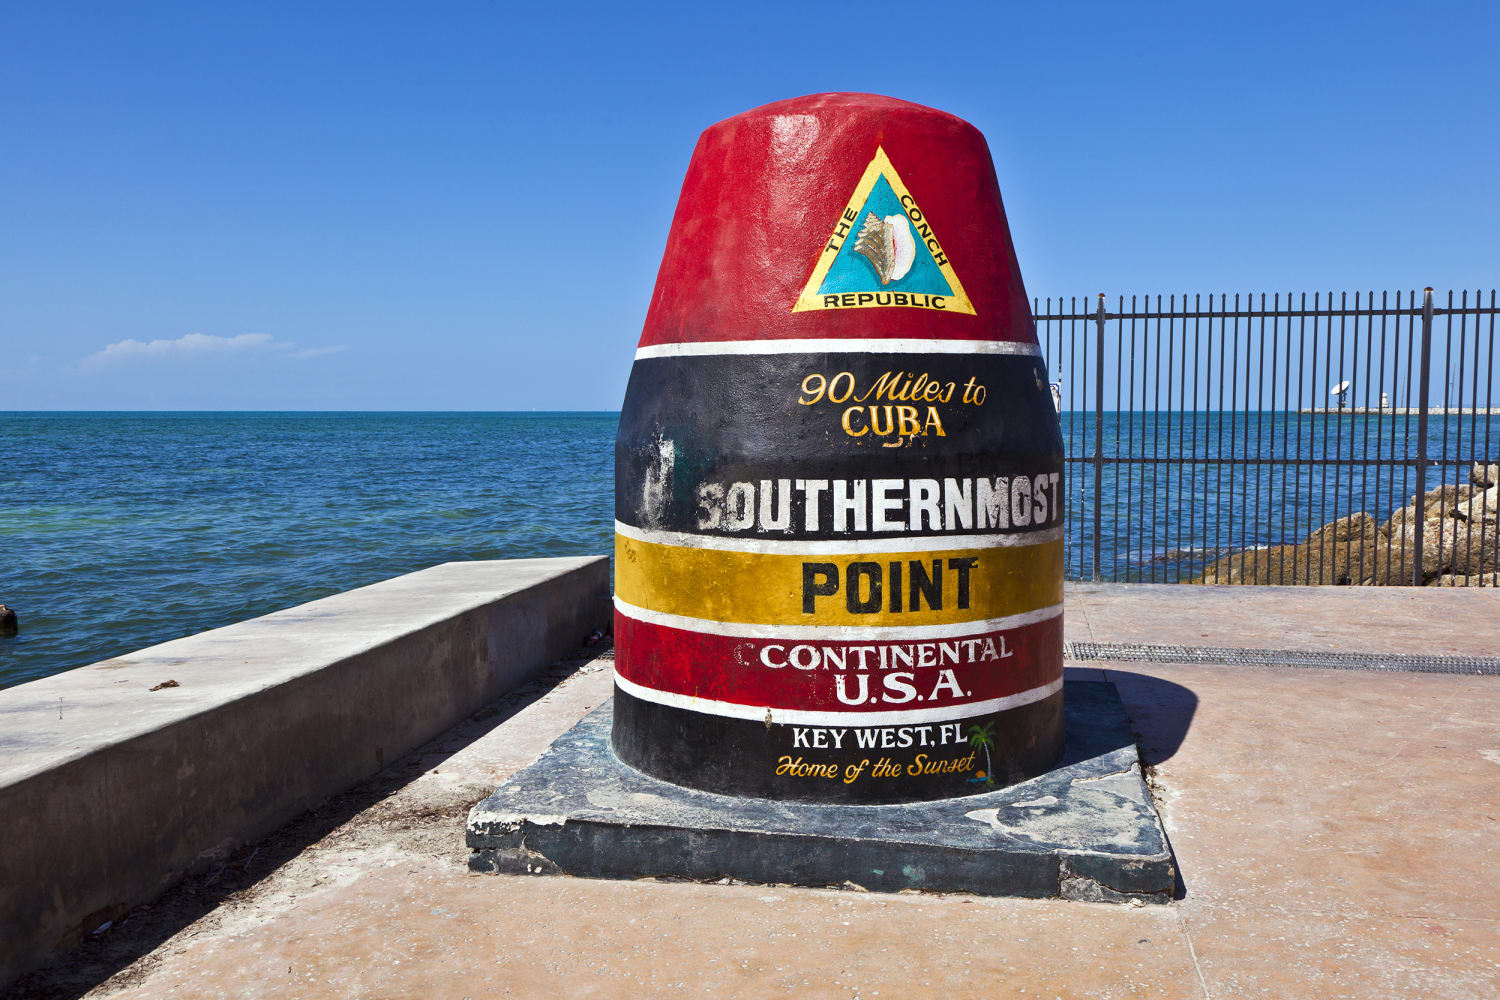 Two men are accused of vandalizing a Key West landmark. A bartender recognized one of them who didn’t tip.